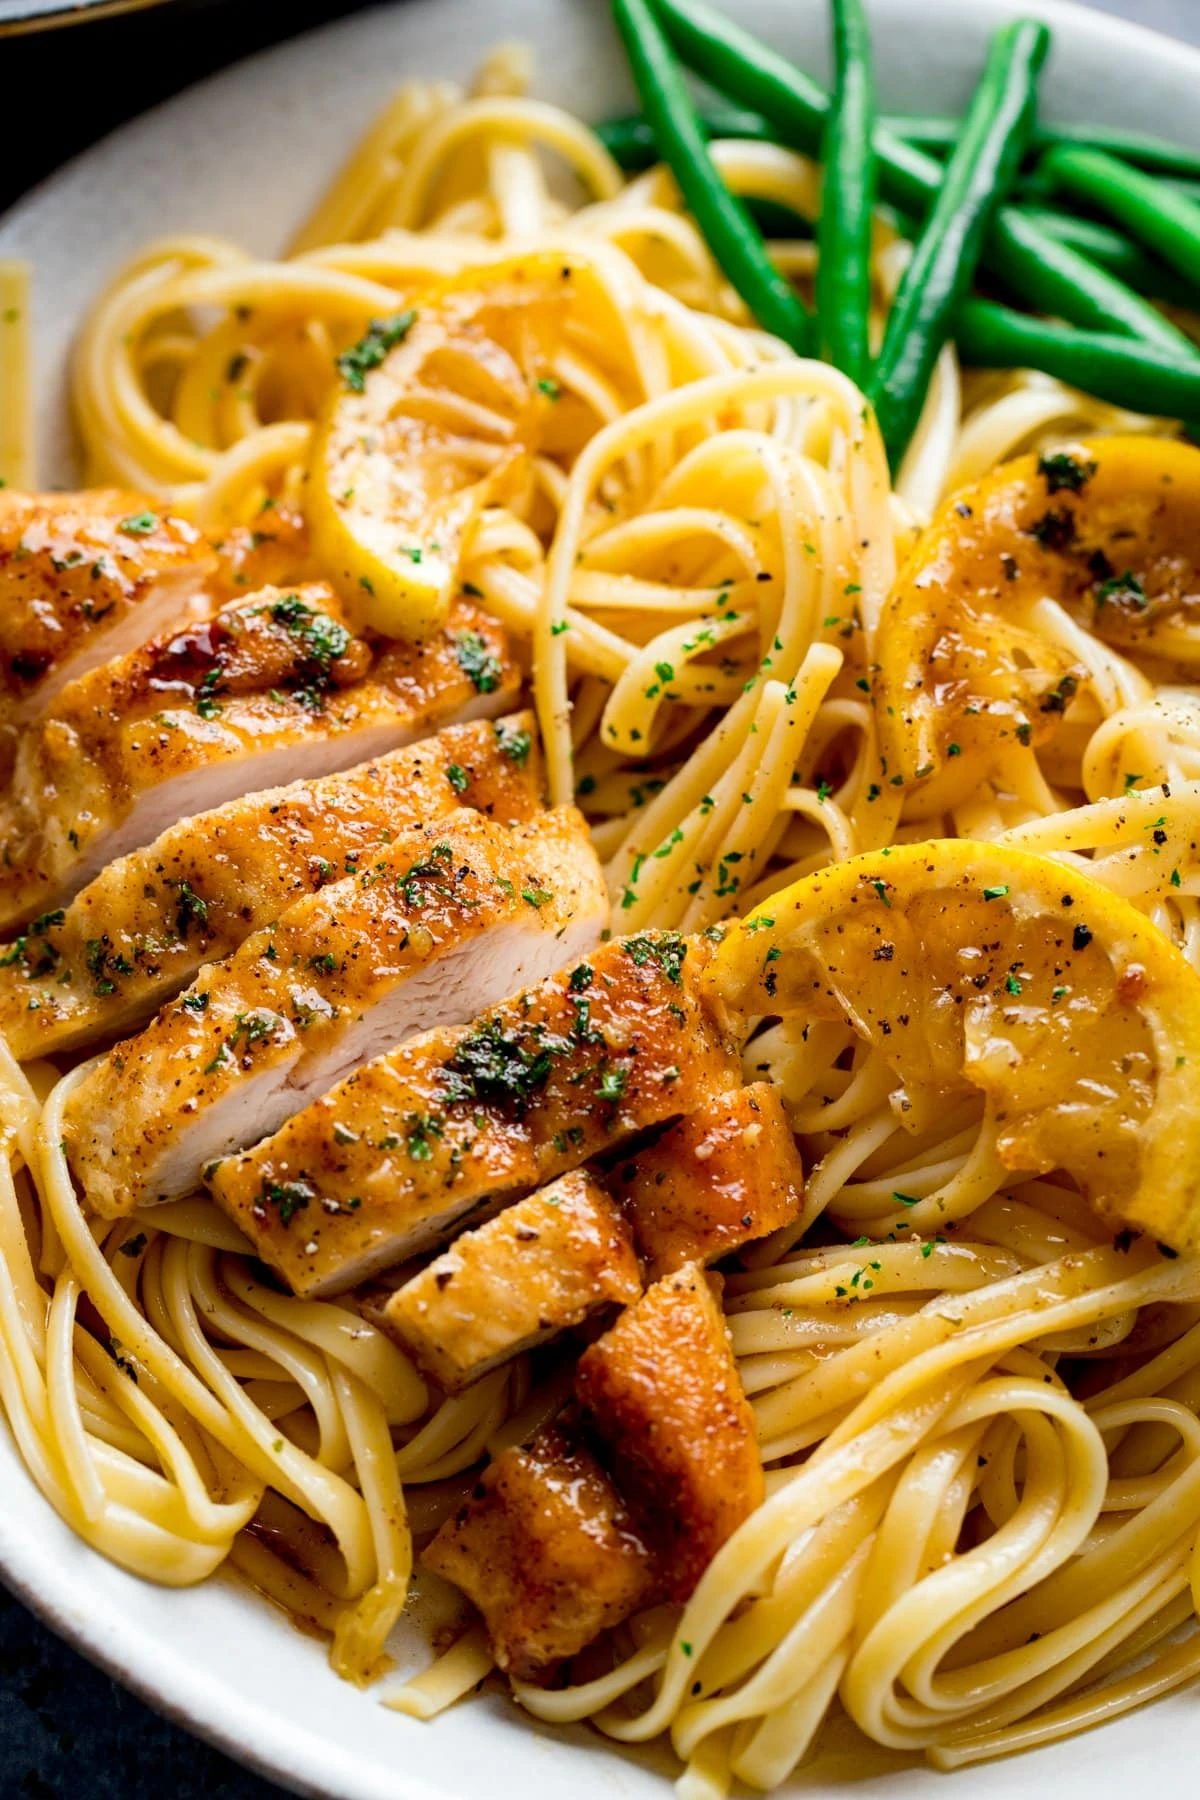 Sliced honey lemon chicken breast on a plate of linguine with green beans.